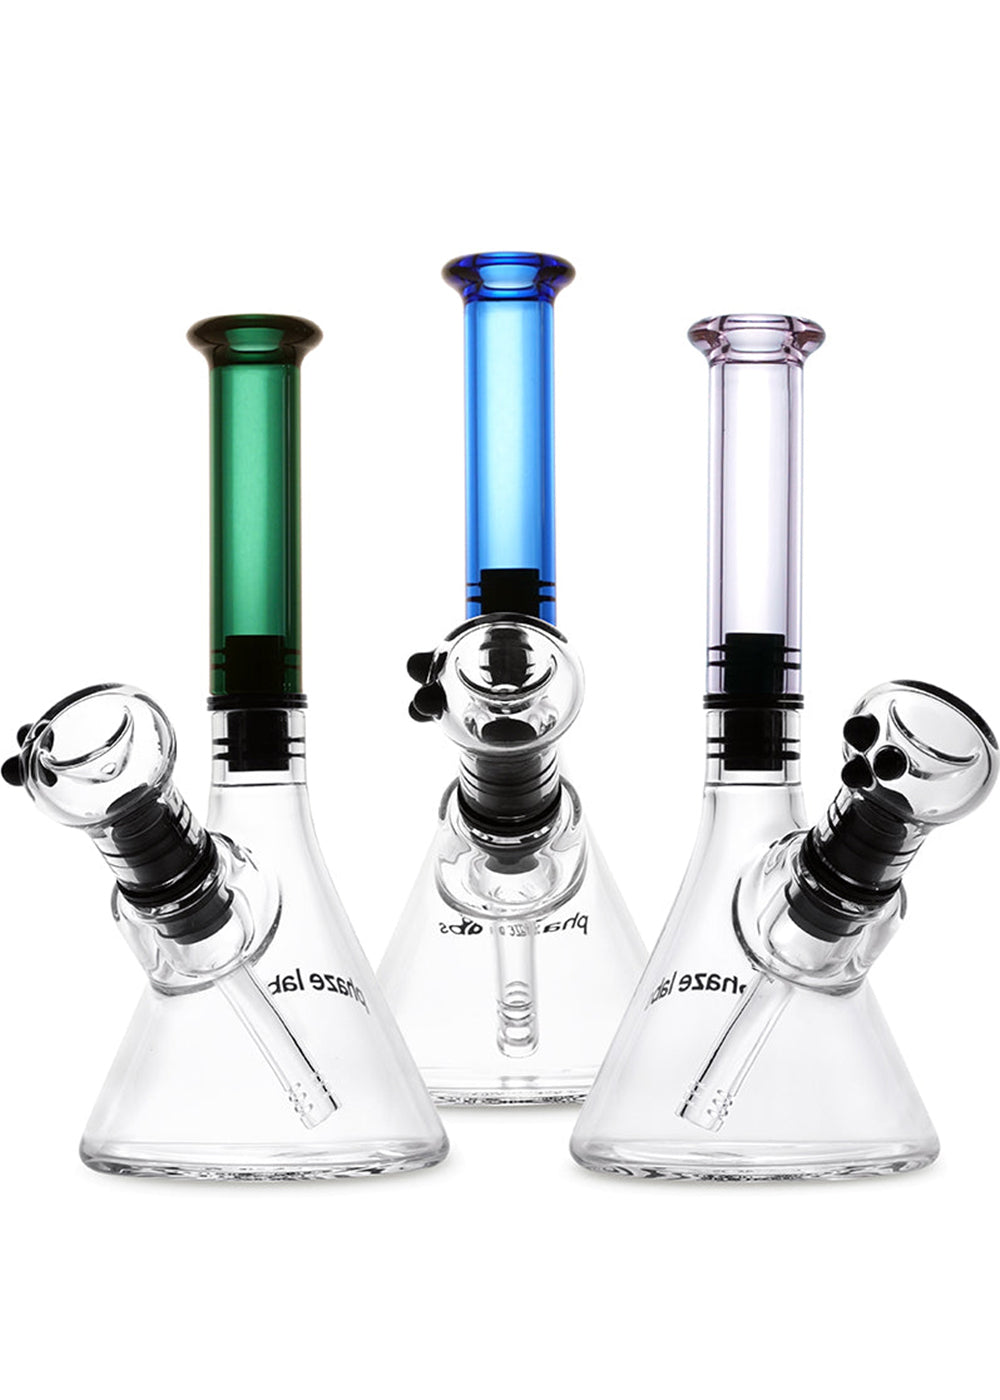 phaze labs magnetic water pipes